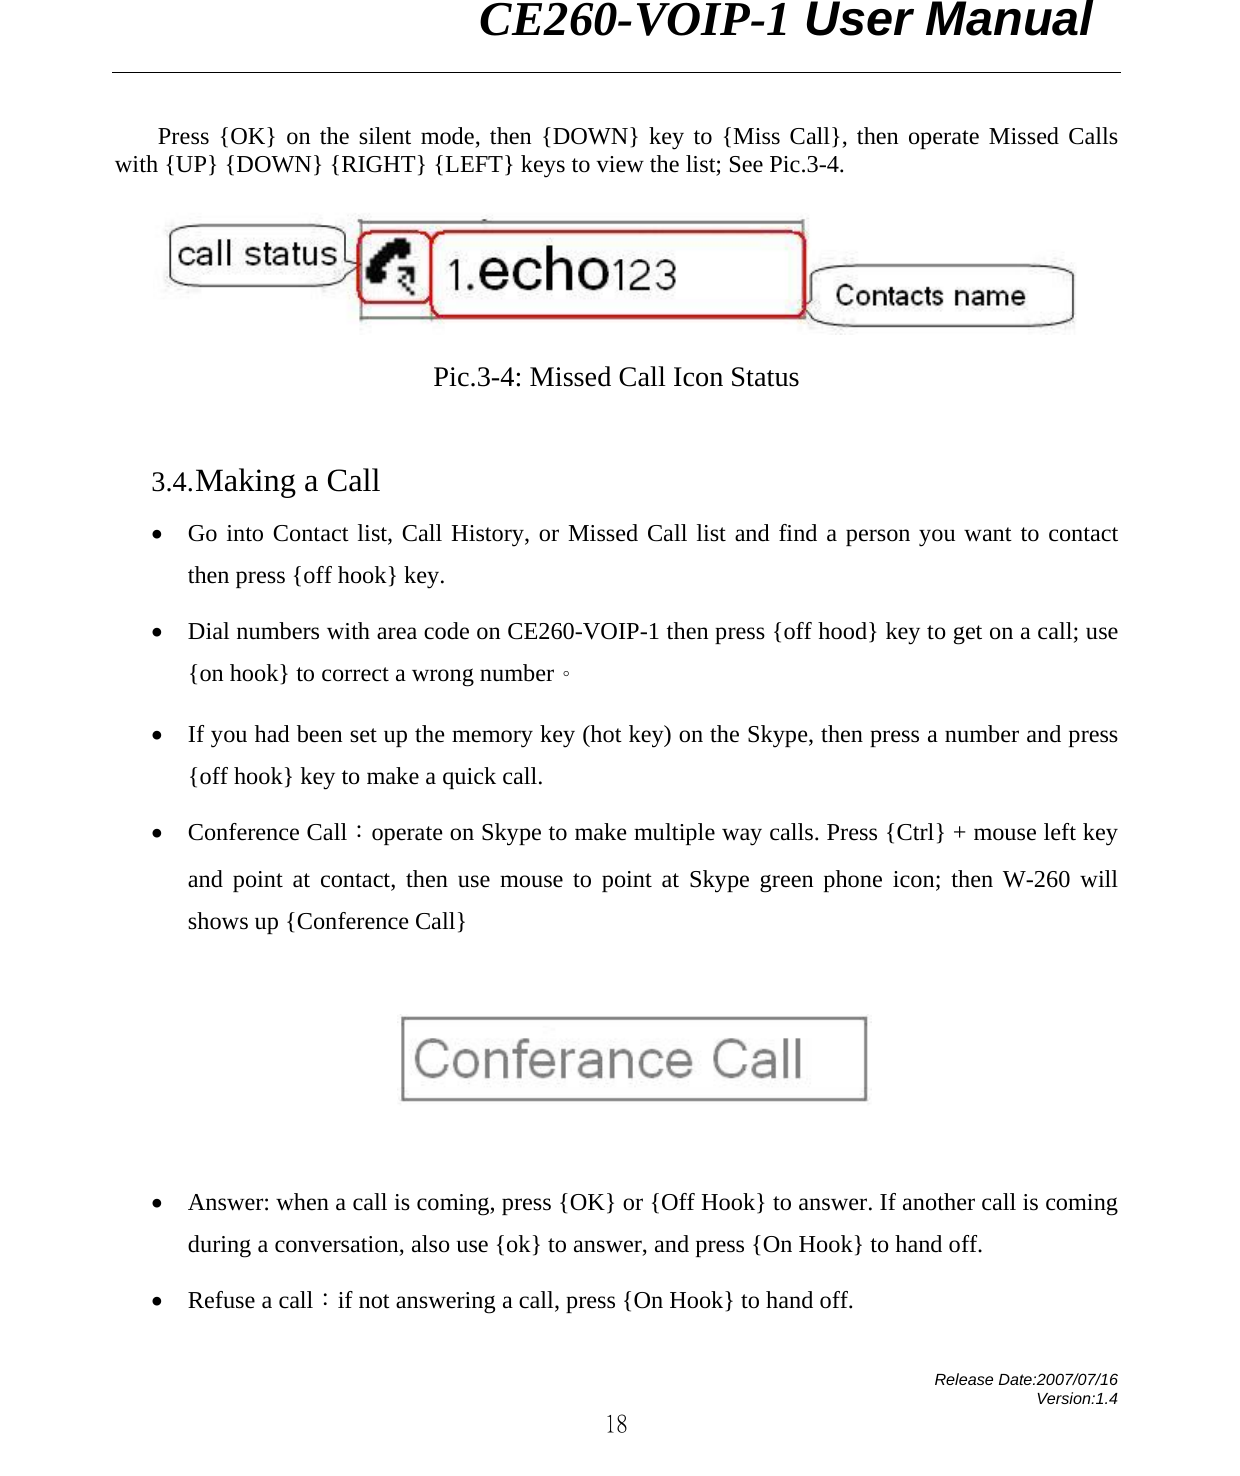                CE260-VOIP-1 User Manual   Release Date:2007/07/16 Version:1.4 18 Press {OK} on the silent mode, then {DOWN} key to {Miss Call}, then operate Missed Calls with {UP} {DOWN} {RIGHT} {LEFT} keys to view the list; See Pic.3-4.    Pic.3-4: Missed Call Icon Status            3.4. Making a Call • Go into Contact list, Call History, or Missed Call list and find a person you want to contact then press {off hook} key.   • Dial numbers with area code on CE260-VOIP-1 then press {off hood} key to get on a call; use {on hook} to correct a wrong number。 • If you had been set up the memory key (hot key) on the Skype, then press a number and press {off hook} key to make a quick call. • Conference Call：operate on Skype to make multiple way calls. Press {Ctrl} + mouse left key and point at contact, then use mouse to point at Skype green phone icon; then W-260 will shows up {Conference Call}    • Answer: when a call is coming, press {OK} or {Off Hook} to answer. If another call is coming during a conversation, also use {ok} to answer, and press {On Hook} to hand off.   • Refuse a call：if not answering a call, press {On Hook} to hand off. 